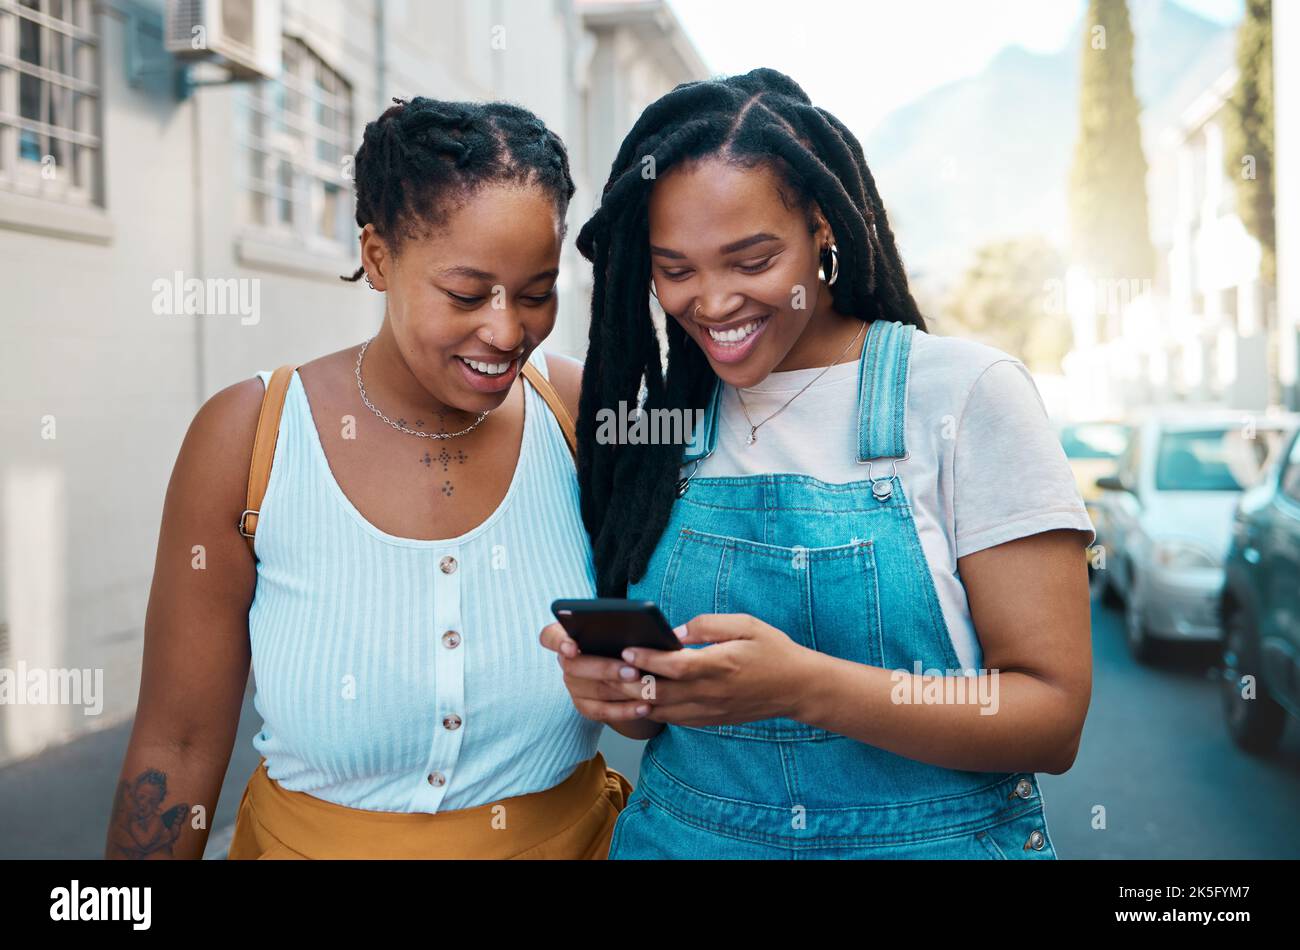 Happy black woman, friends and phone in social media communication, texting together outside an urban street. African women smiling for 5G connection Stock Photo